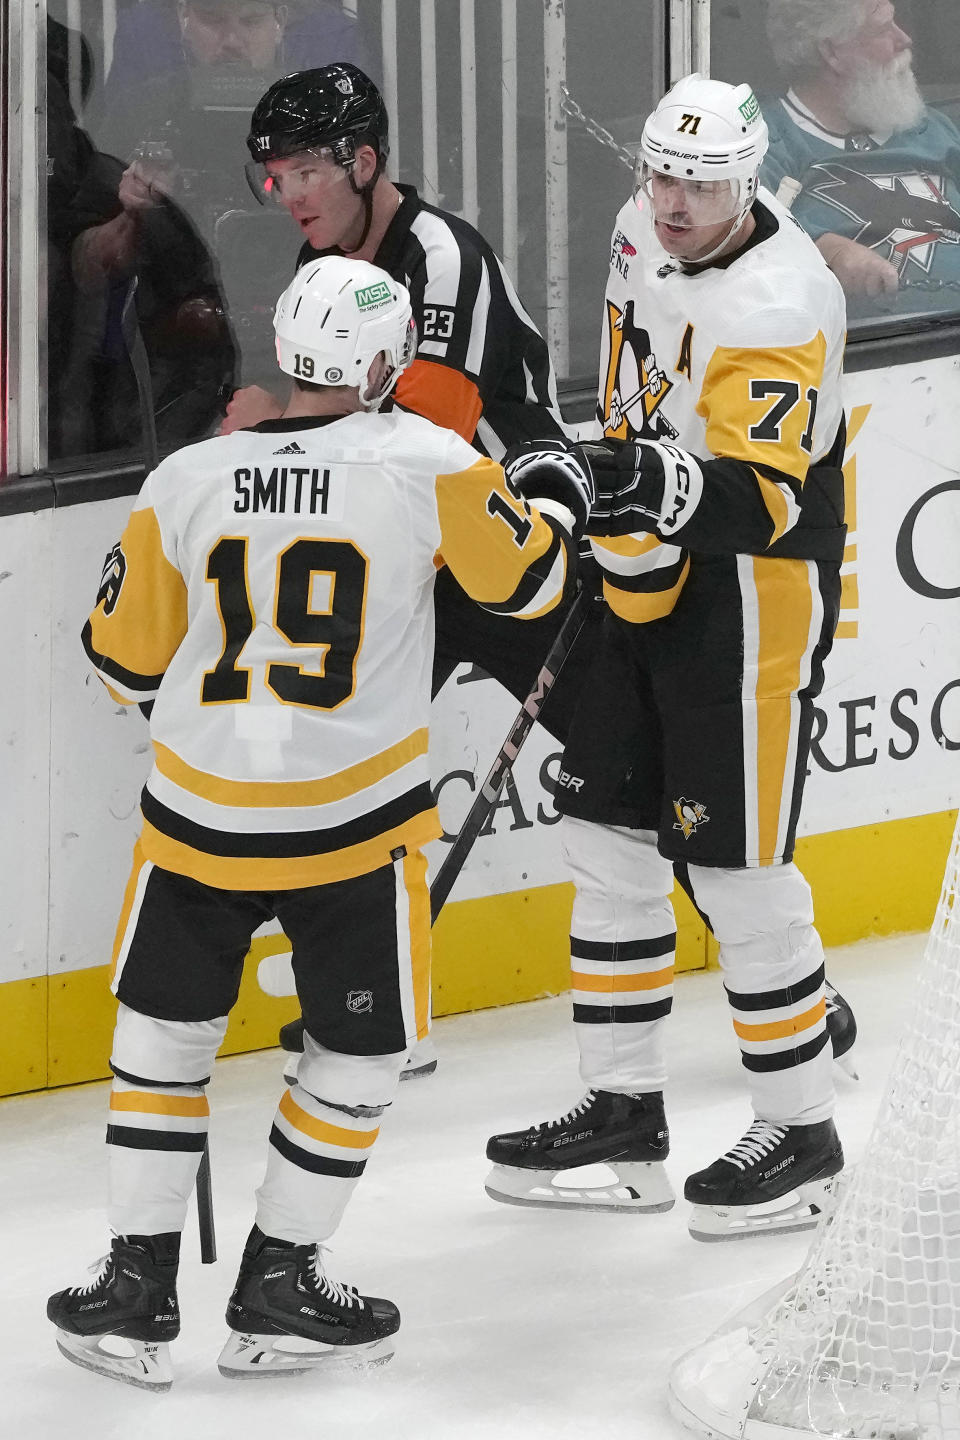 Pittsburgh Penguins center Evgeni Malkin, right, is congratulated by right wing Reilly Smith (19) after scoring during the third period of an NHL hockey game against the San Jose Sharks in San Jose, Calif., Saturday, Nov. 4, 2023. (AP Photo/Jeff Chiu)